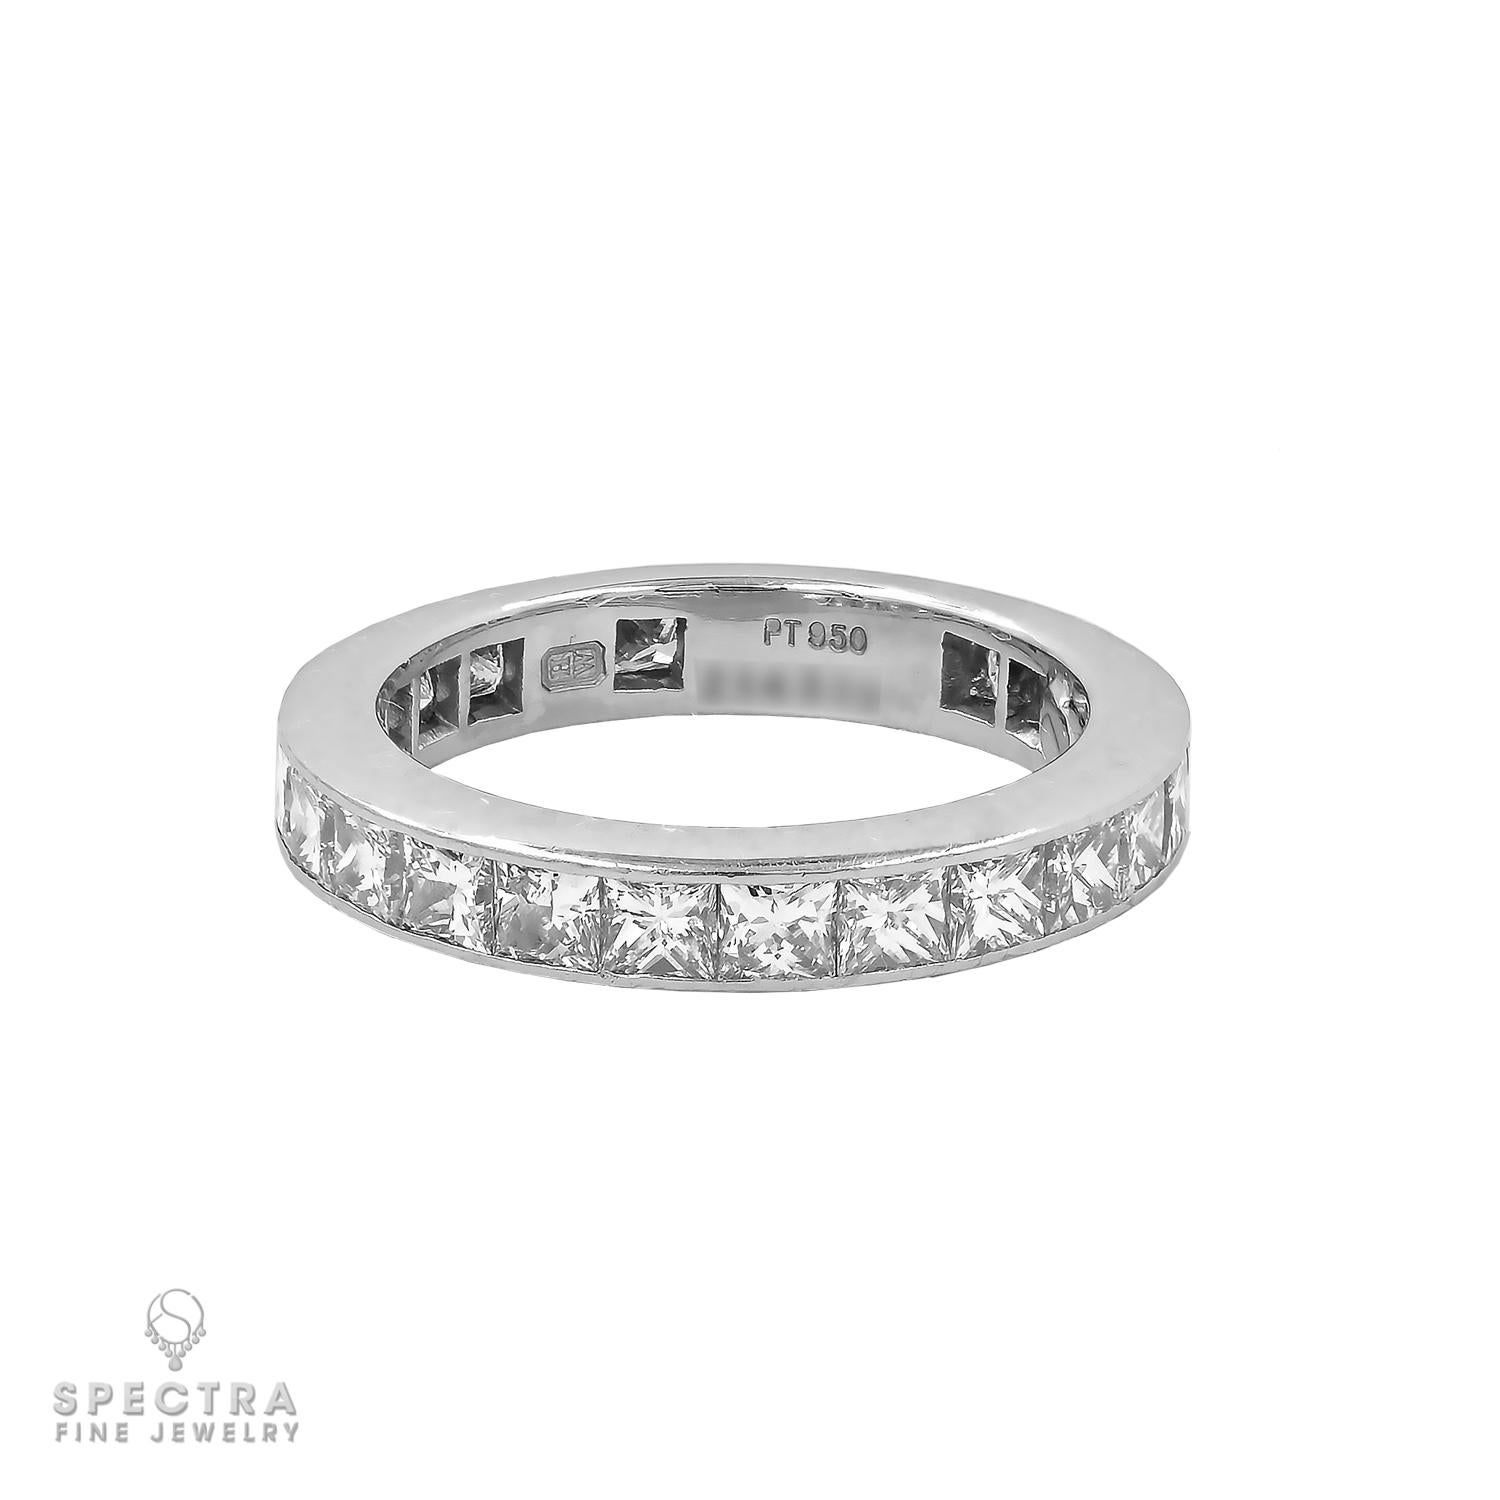 The Harry Winston Channel-Set Princess-Cut Diamond Wedding Band is a celebration of enduring love and unsurpassed quality. This beautiful ring is adorned with a dazzling array of 2.50 carats of channel-set princess-cut diamonds, meticulously set to